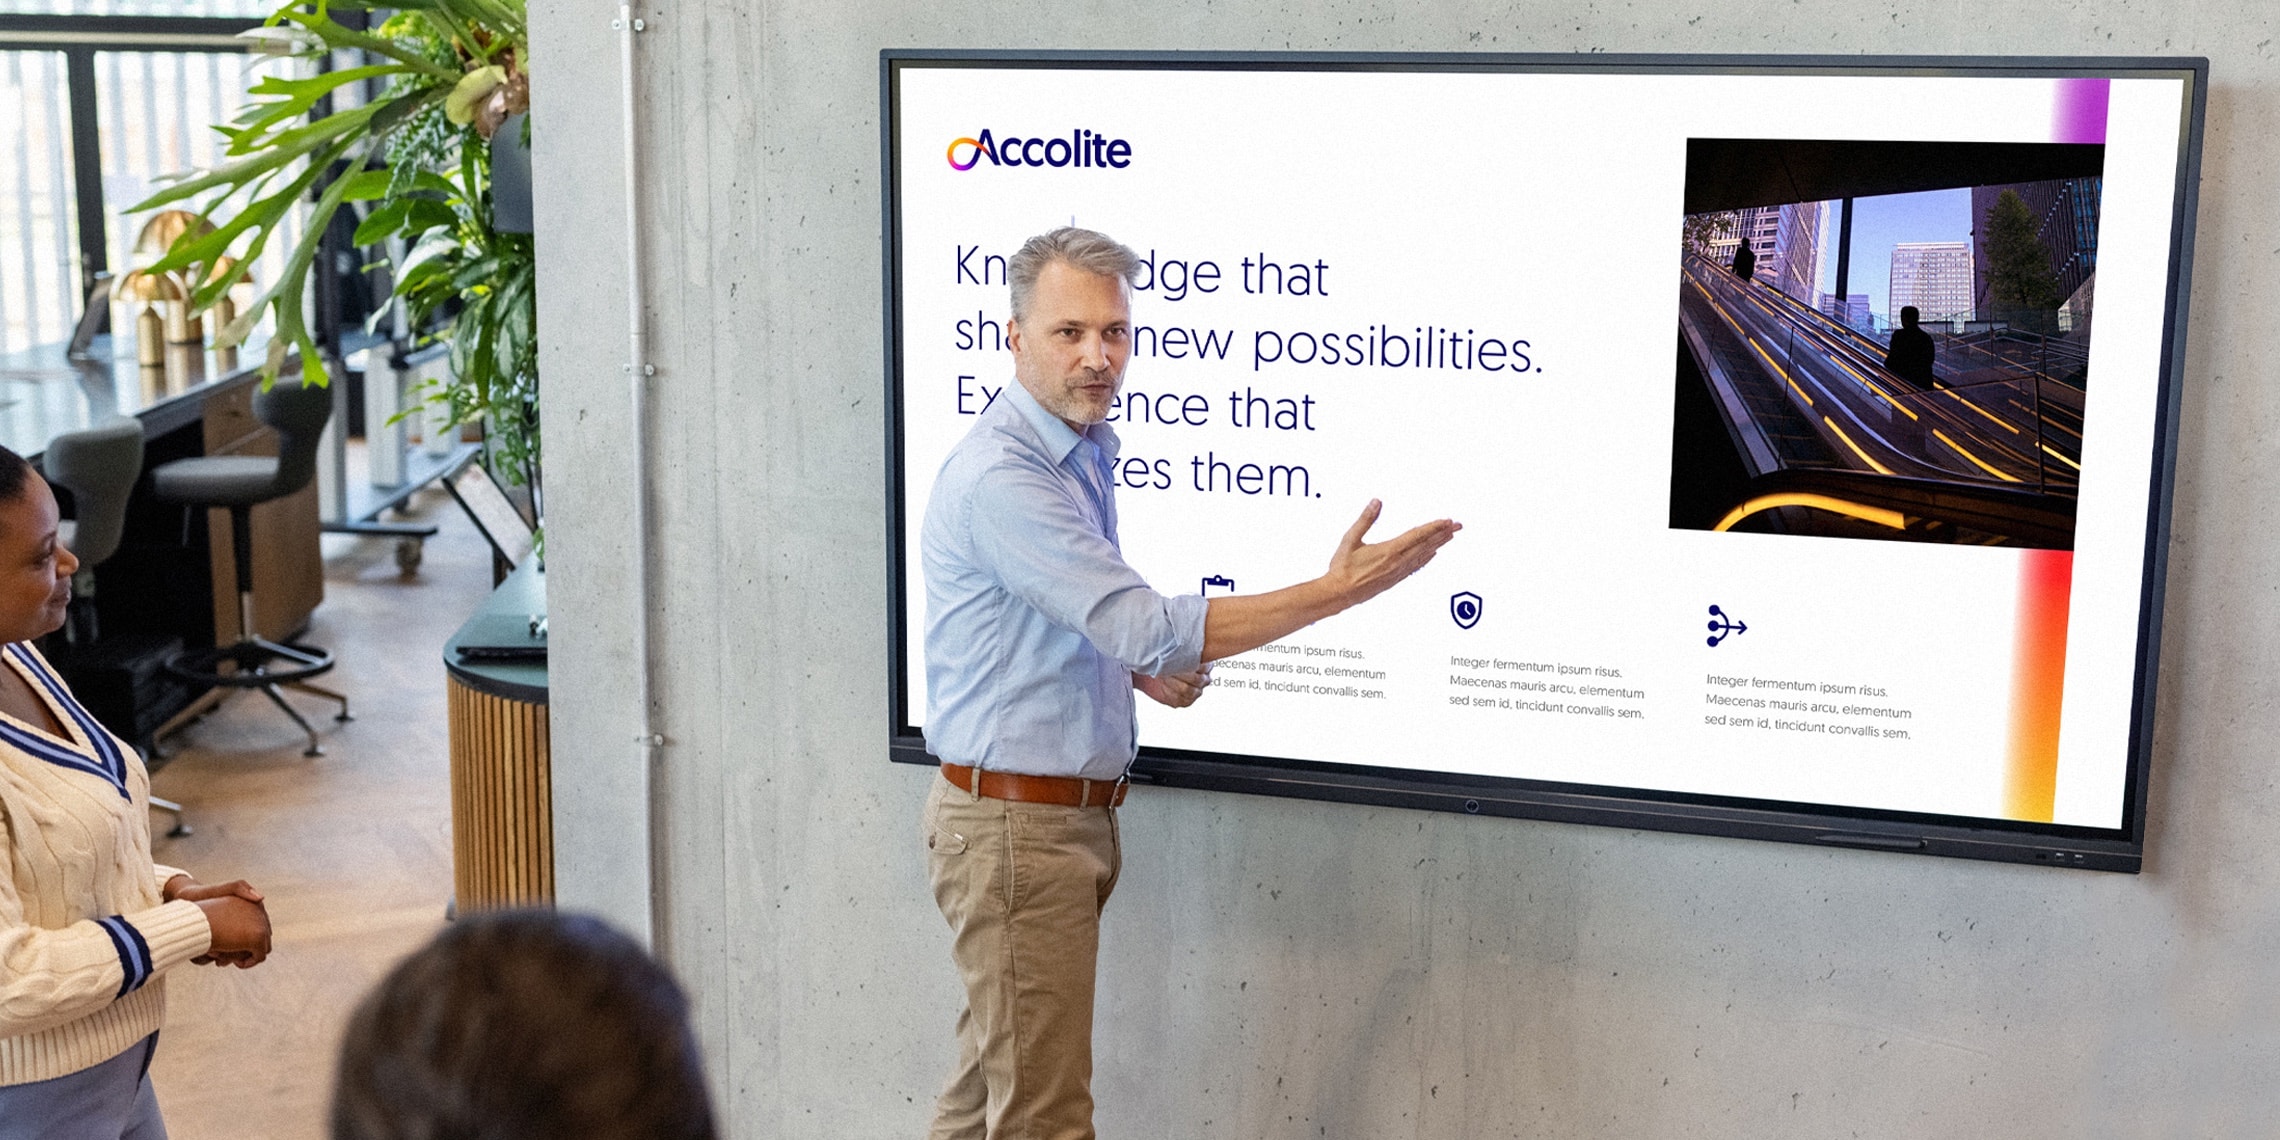 A man in front of a large screen displaying an Accolite presentation